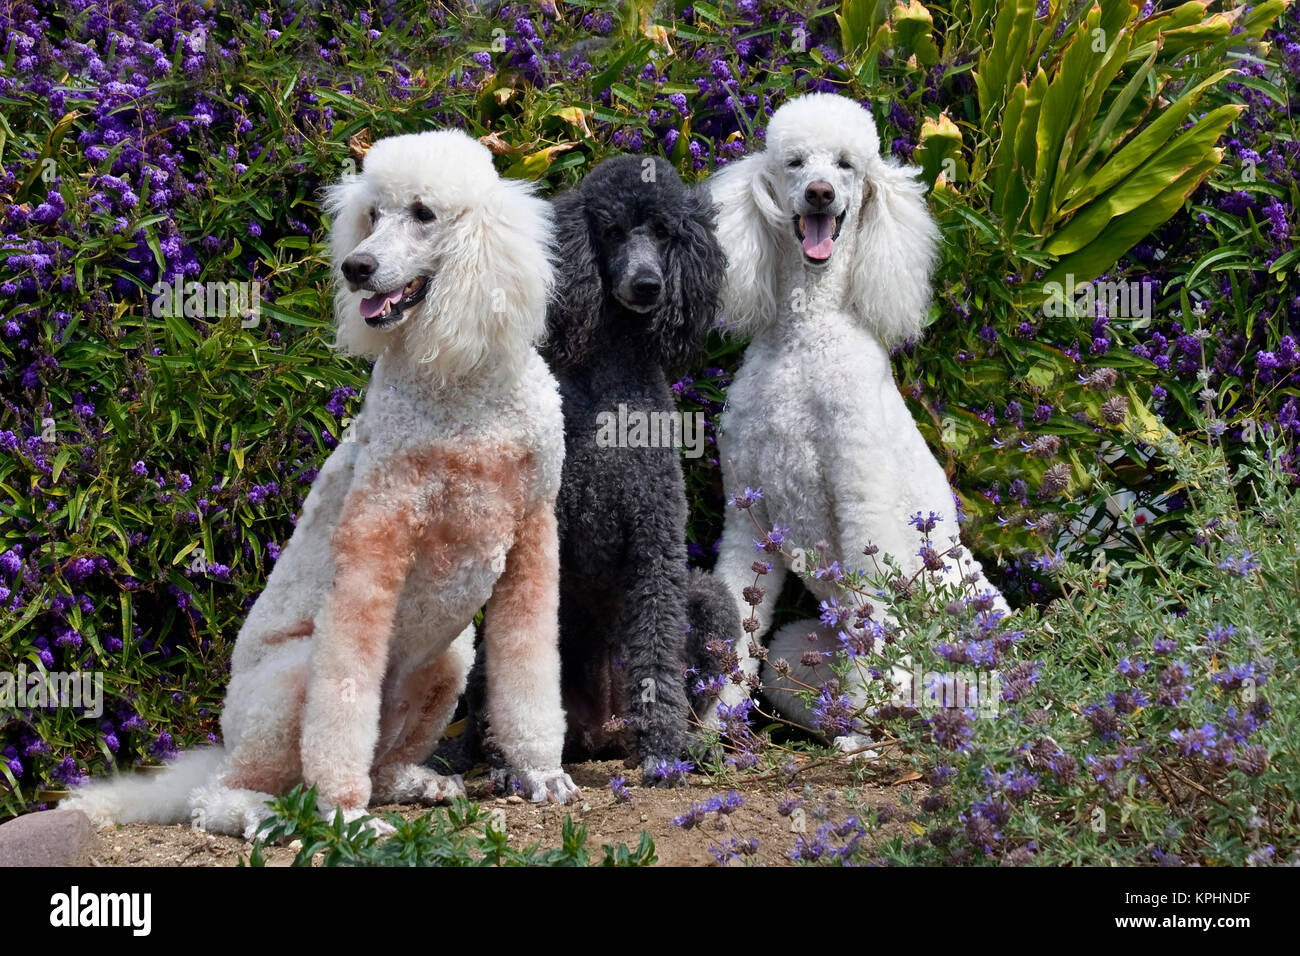 USA, California. Three Standard Poodles sitting together in front of purple flowers. Stock Photo